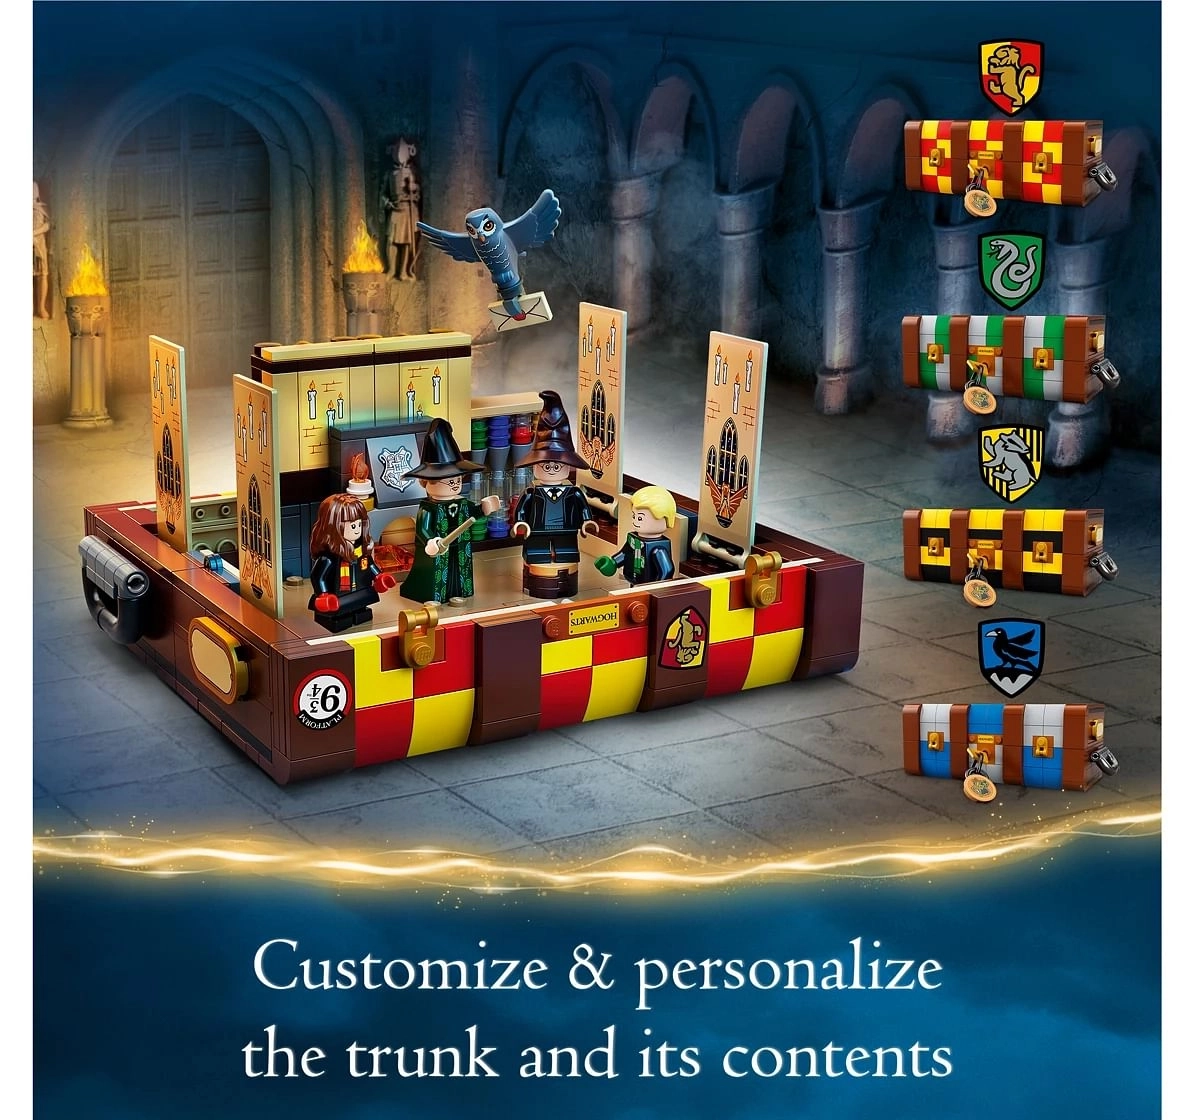 Lego Harry Potter Hogwarts Magical Trunk Building Kit Featuring Popular Character Minifigures from The Harry Potter Movies, Great Gift for Kids Aged 8+ (603 Pieces)